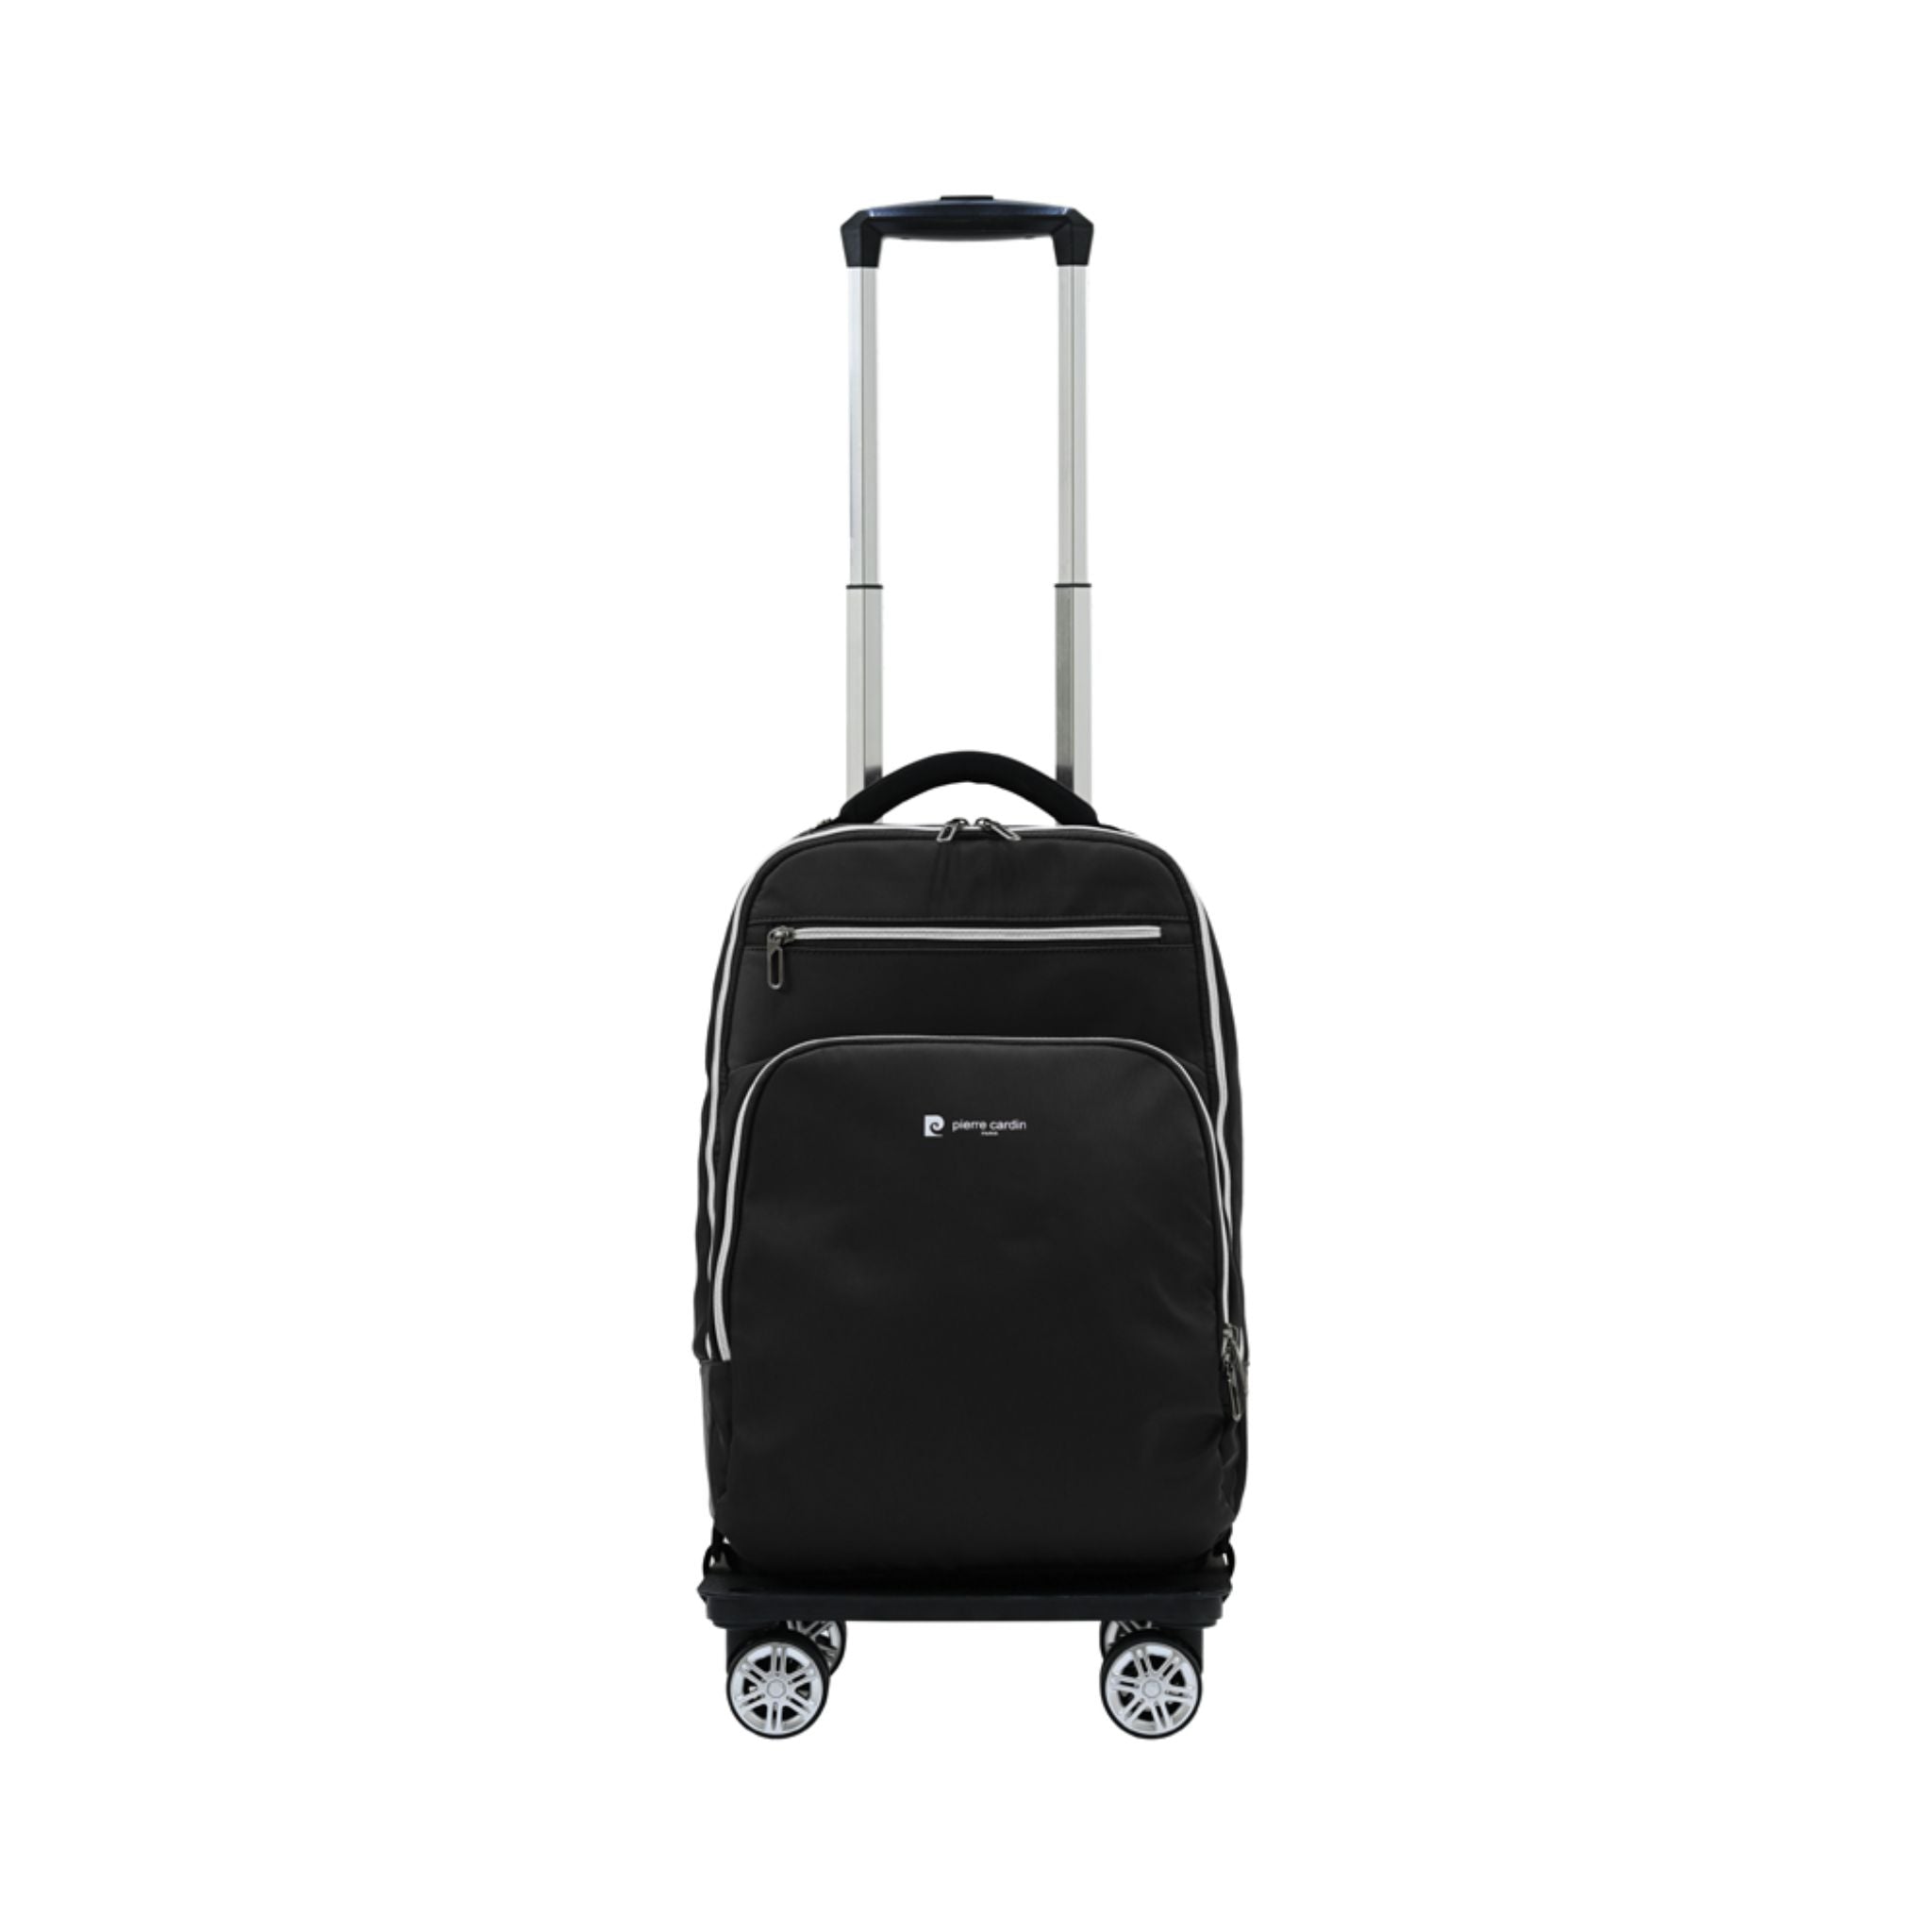 Pierre Cardin Backpack with Detachable Trolley - Black